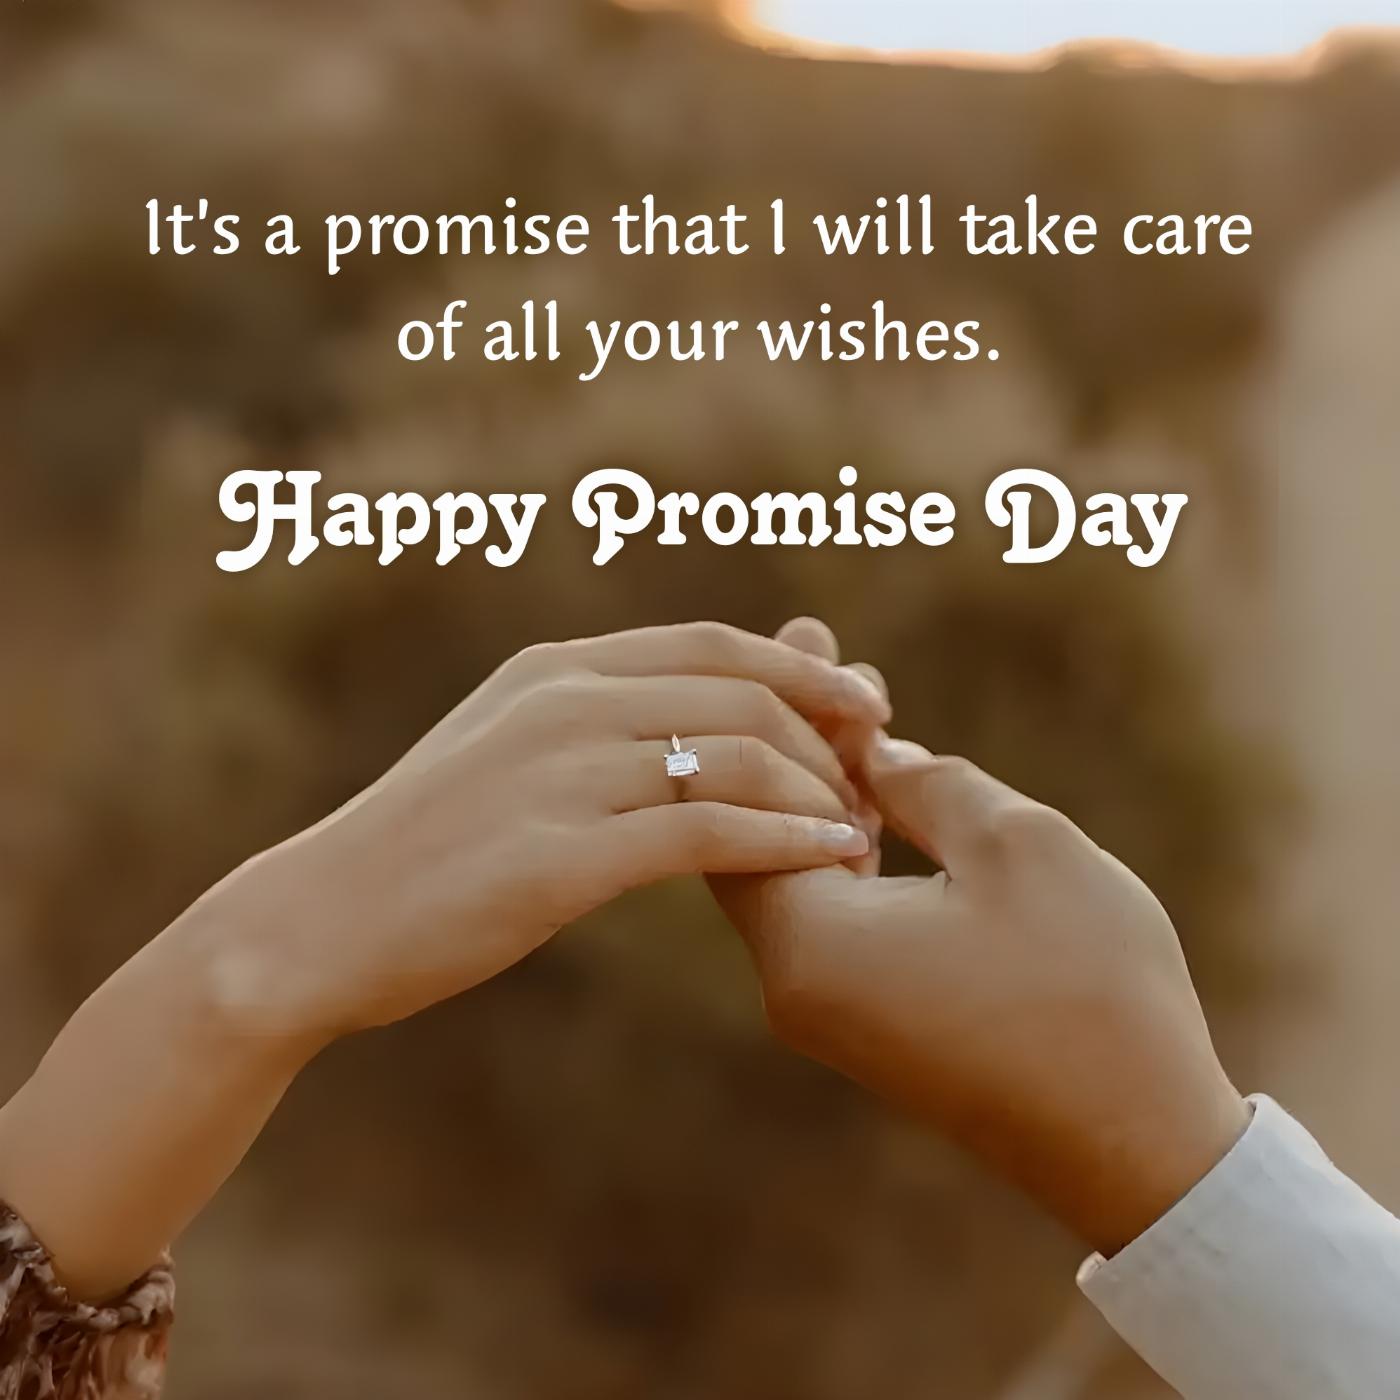 Its a promise that I will take care of all your wishes